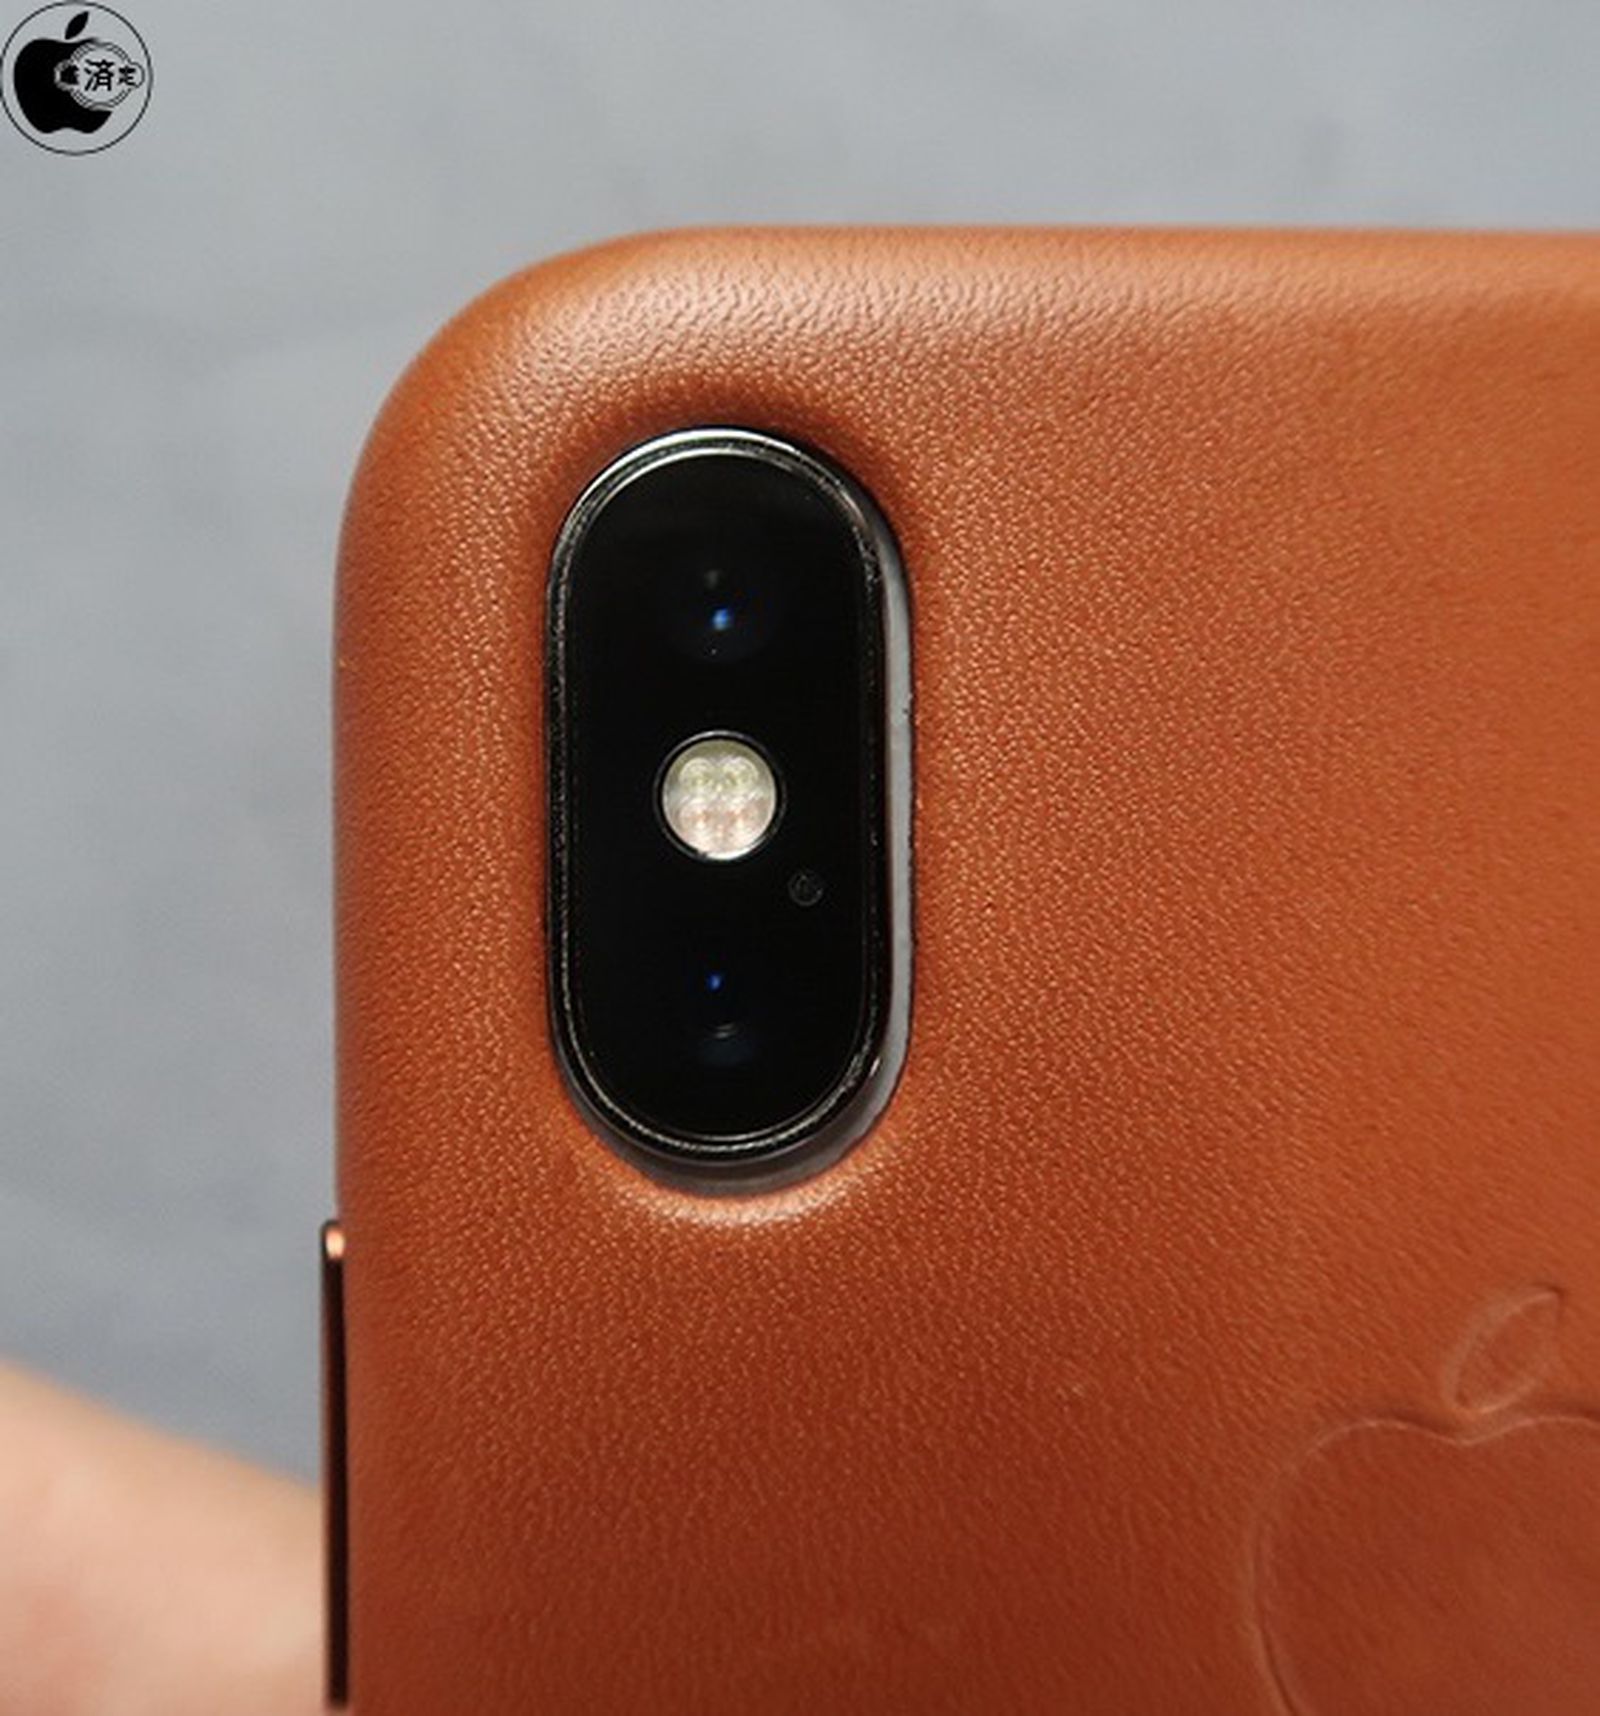 mask stereo loom iPhone X Cases May Have Slightly Imperfect Fit on iPhone XS Due to New  Camera Bump Dimensions - MacRumors